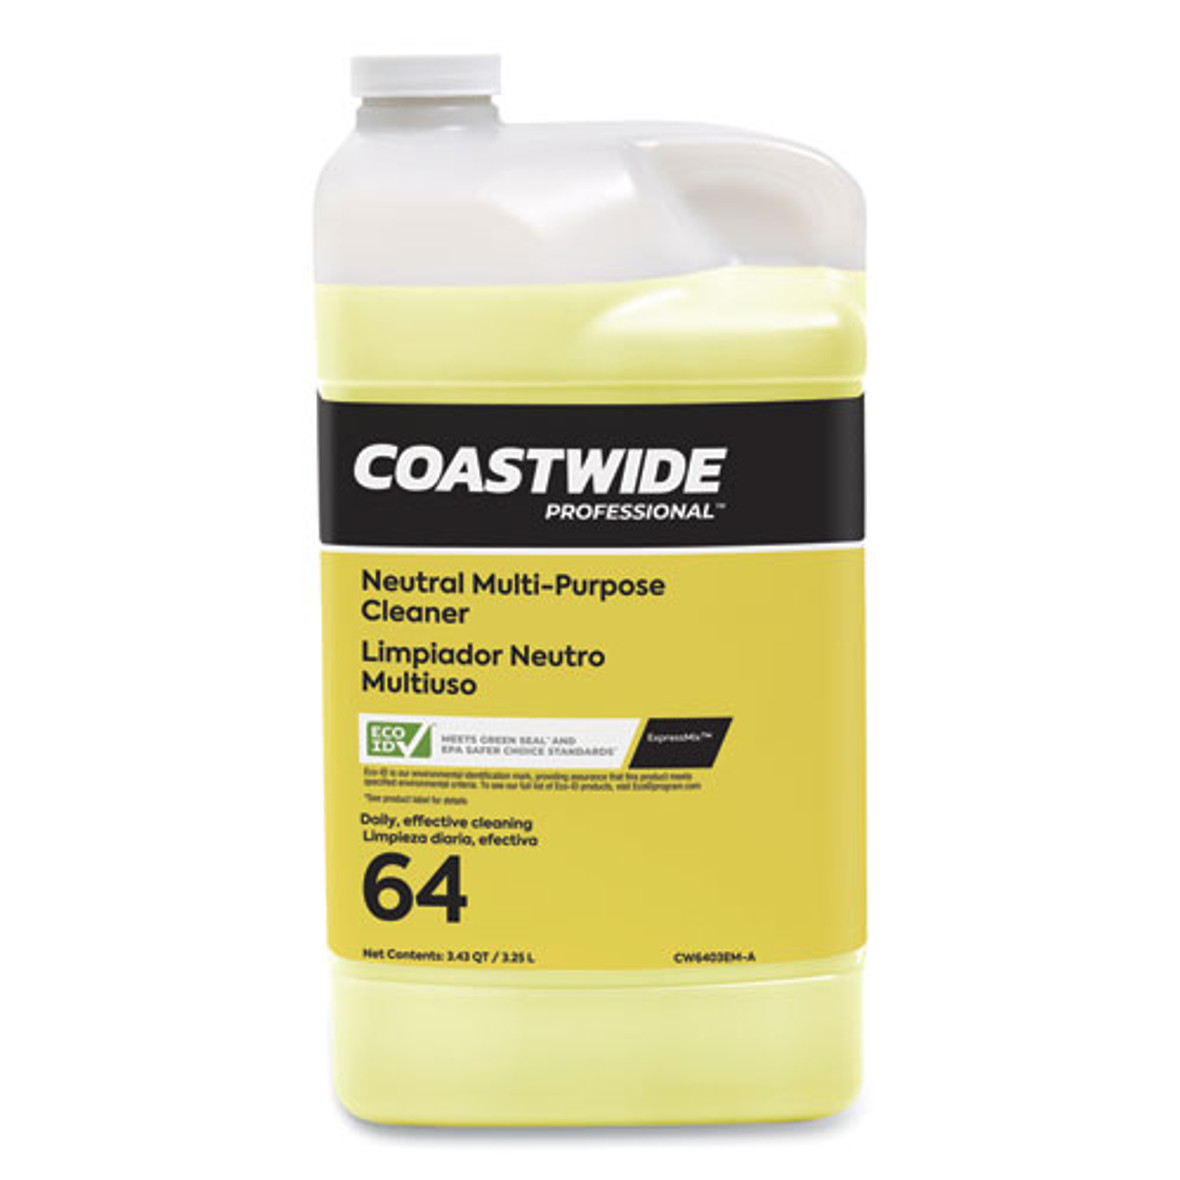 Coastwide Professional Neutral Multi-Purpose Cleaner 64 Eco-ID Concentrate for ExpressMix Systems, Citrus Scent, 110 oz Bottle, 2/Carton